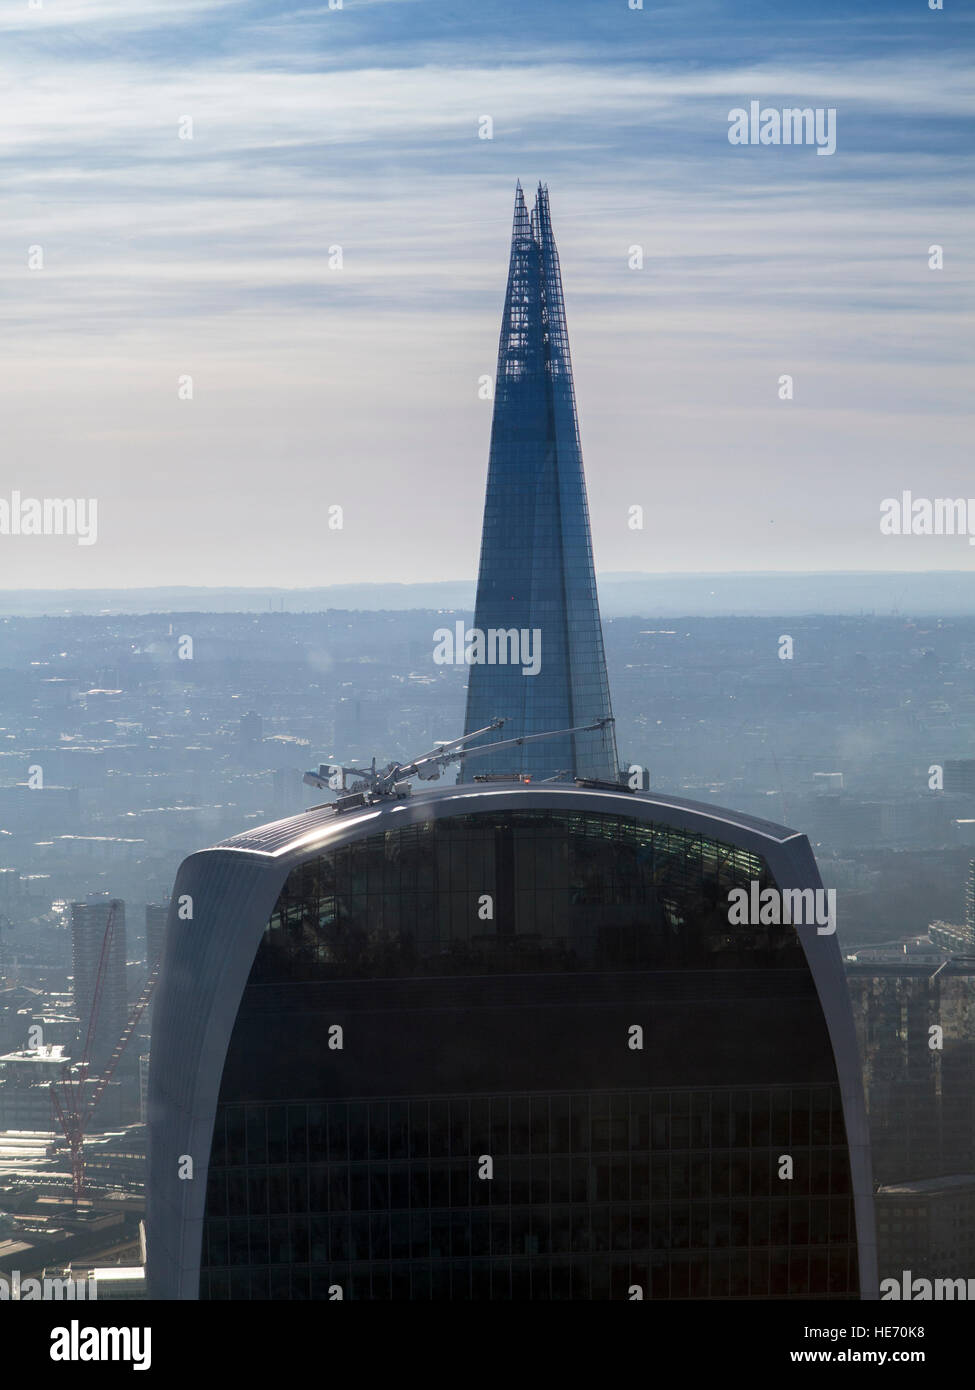 London: The Shard and the 'Walkie Talkie' building Stock Photo